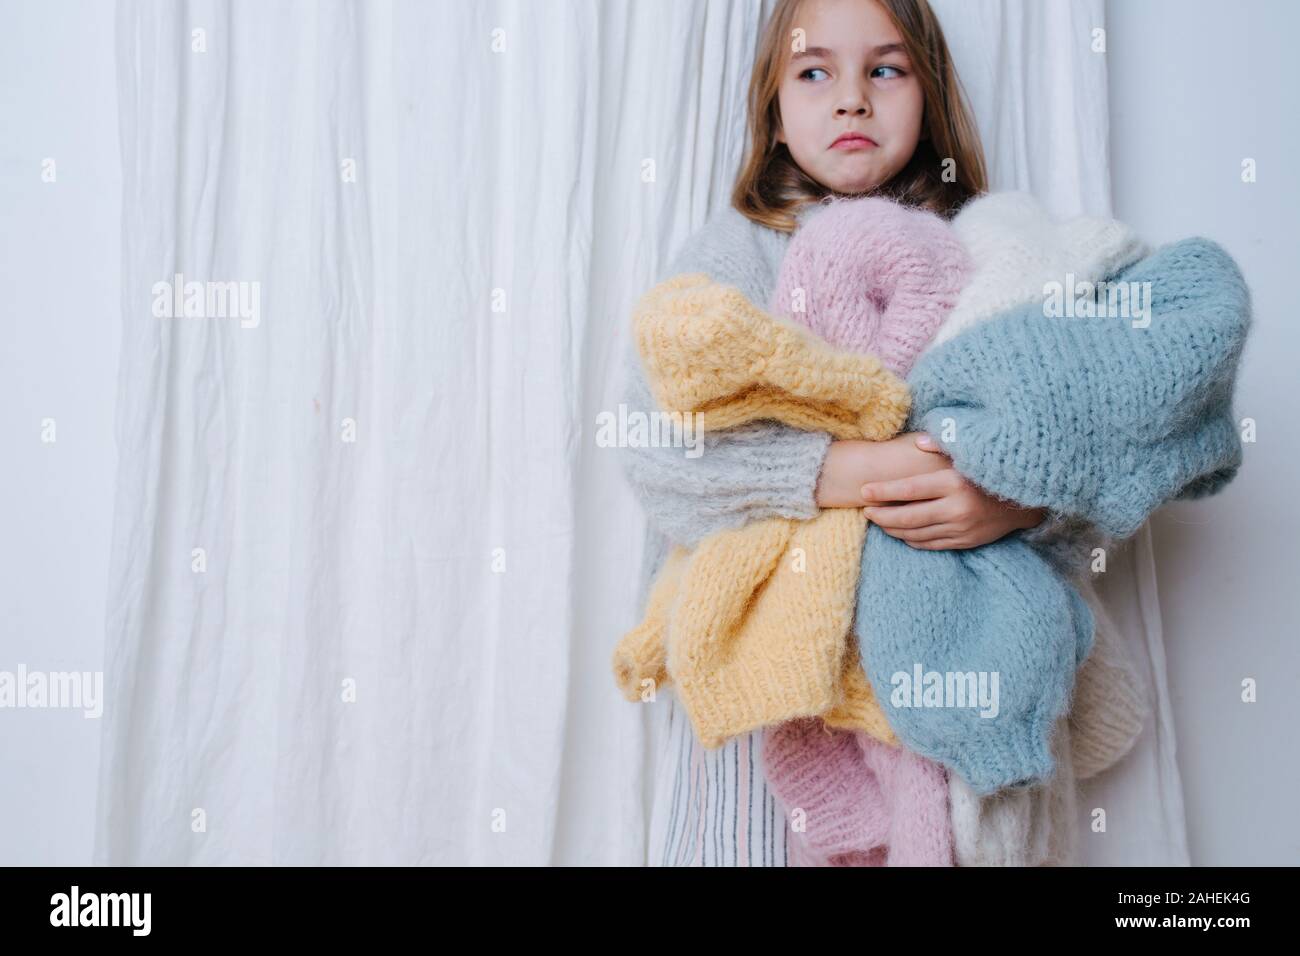 Upset little girl with a pile of soft freshly washed sweaters doing chores Stock Photo